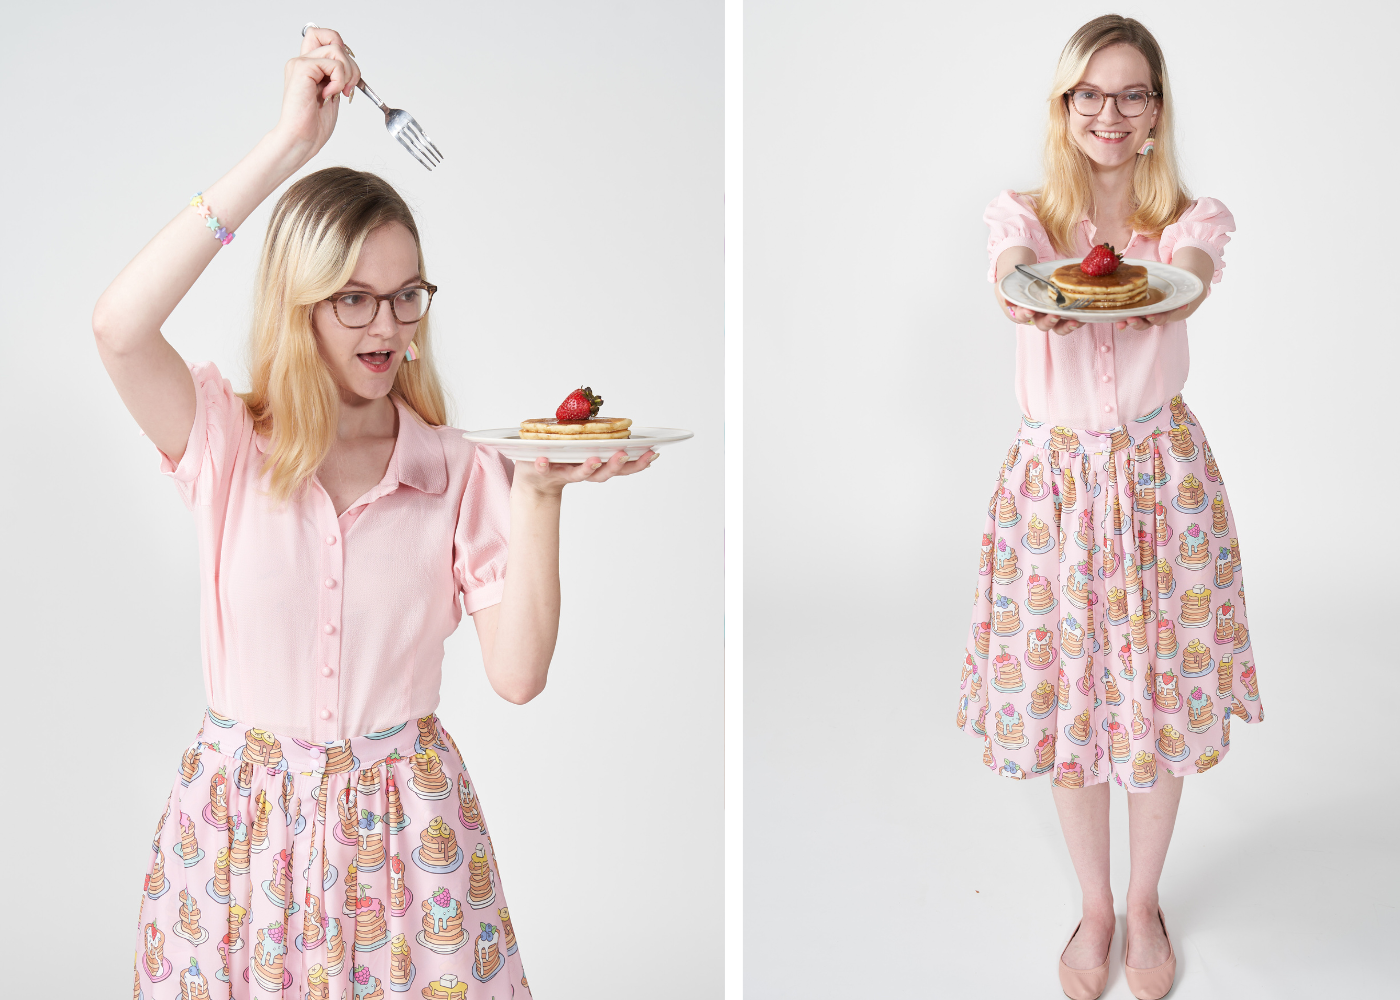 Anna is a white woman with long reddish blonde hair wearing a pink button up blouse and pink pancake button up skirt. She is holding a plate of pancakes with syrup and strawberry.